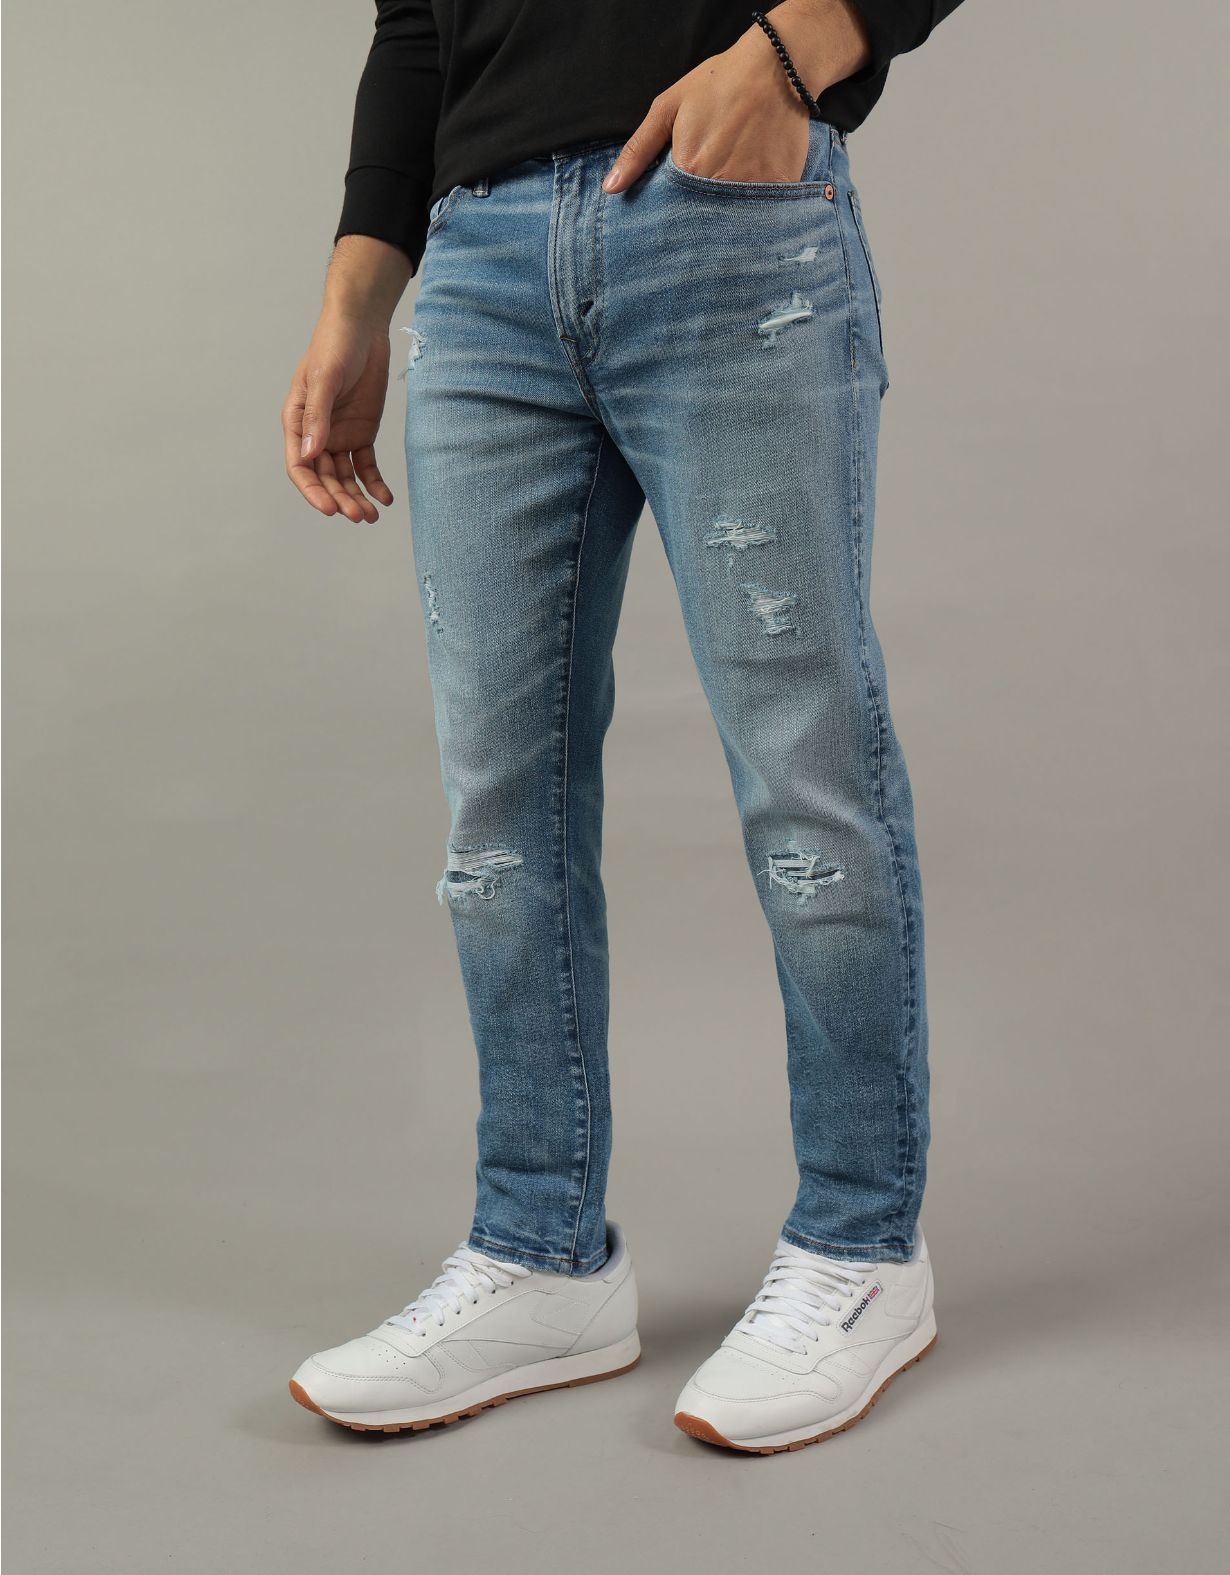 AE AirFlex+ Ultrasoft Patched Slim Jean